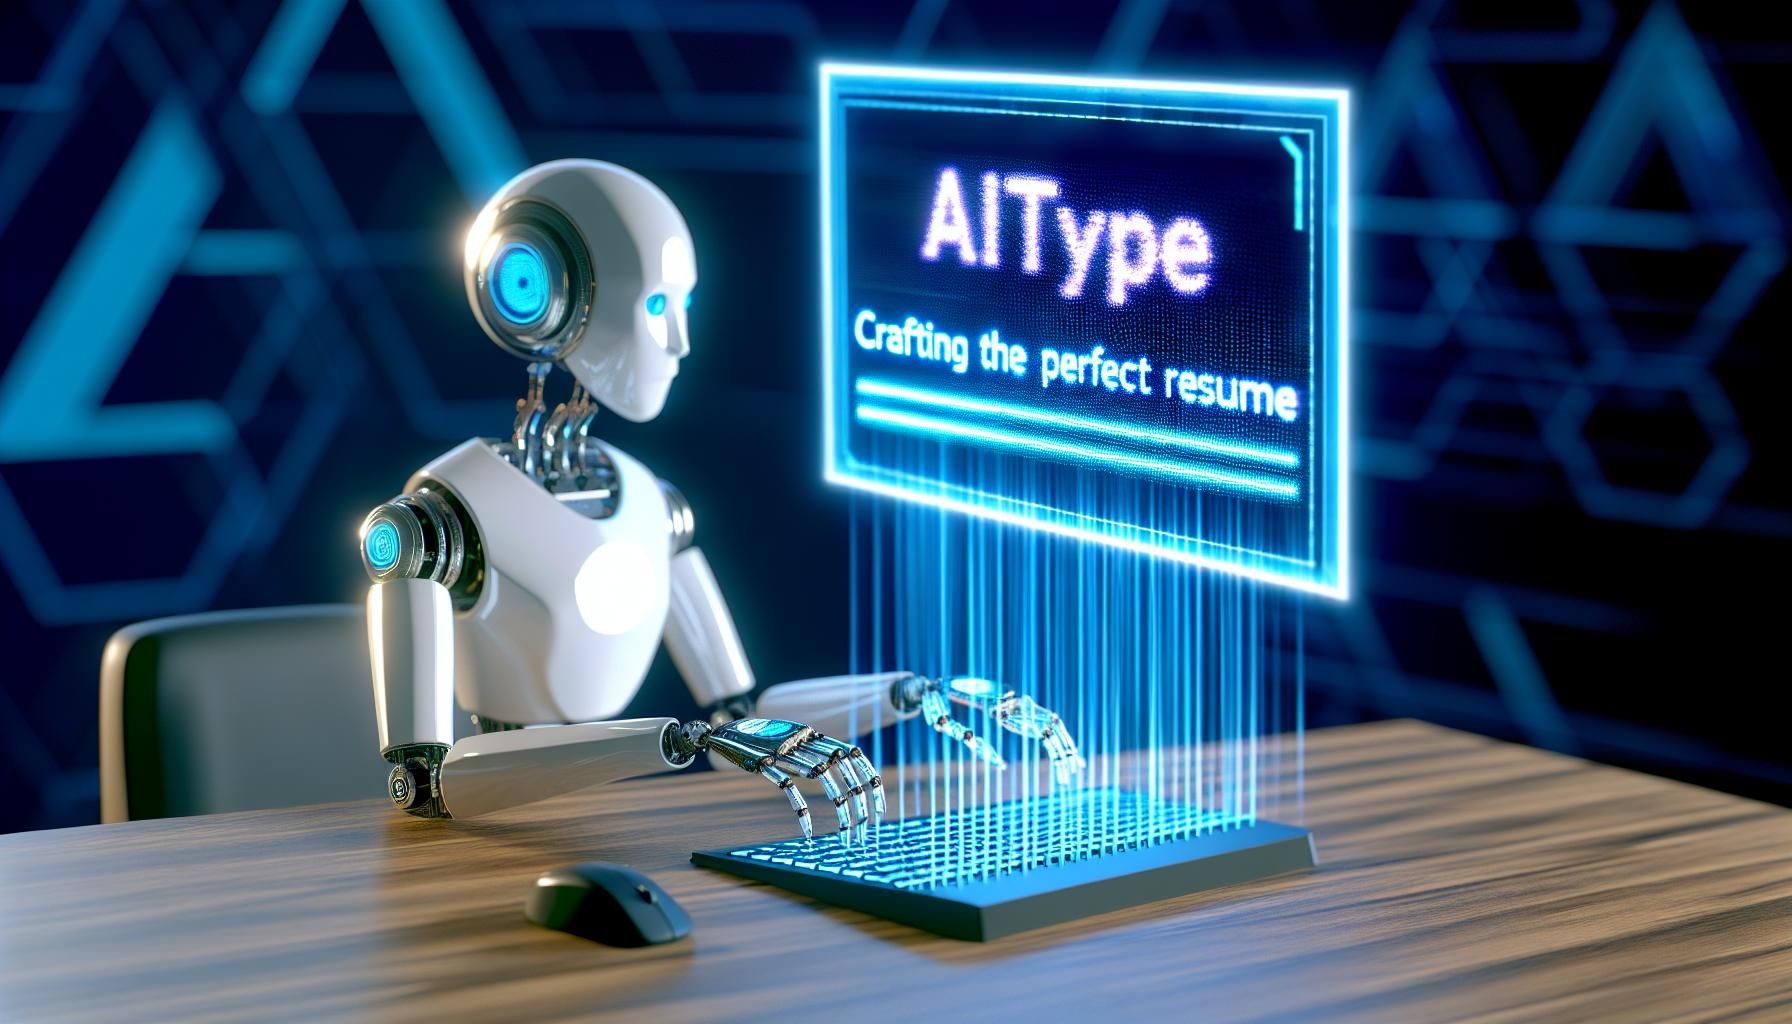 Crafting the Perfect Resume with AIType --- Description